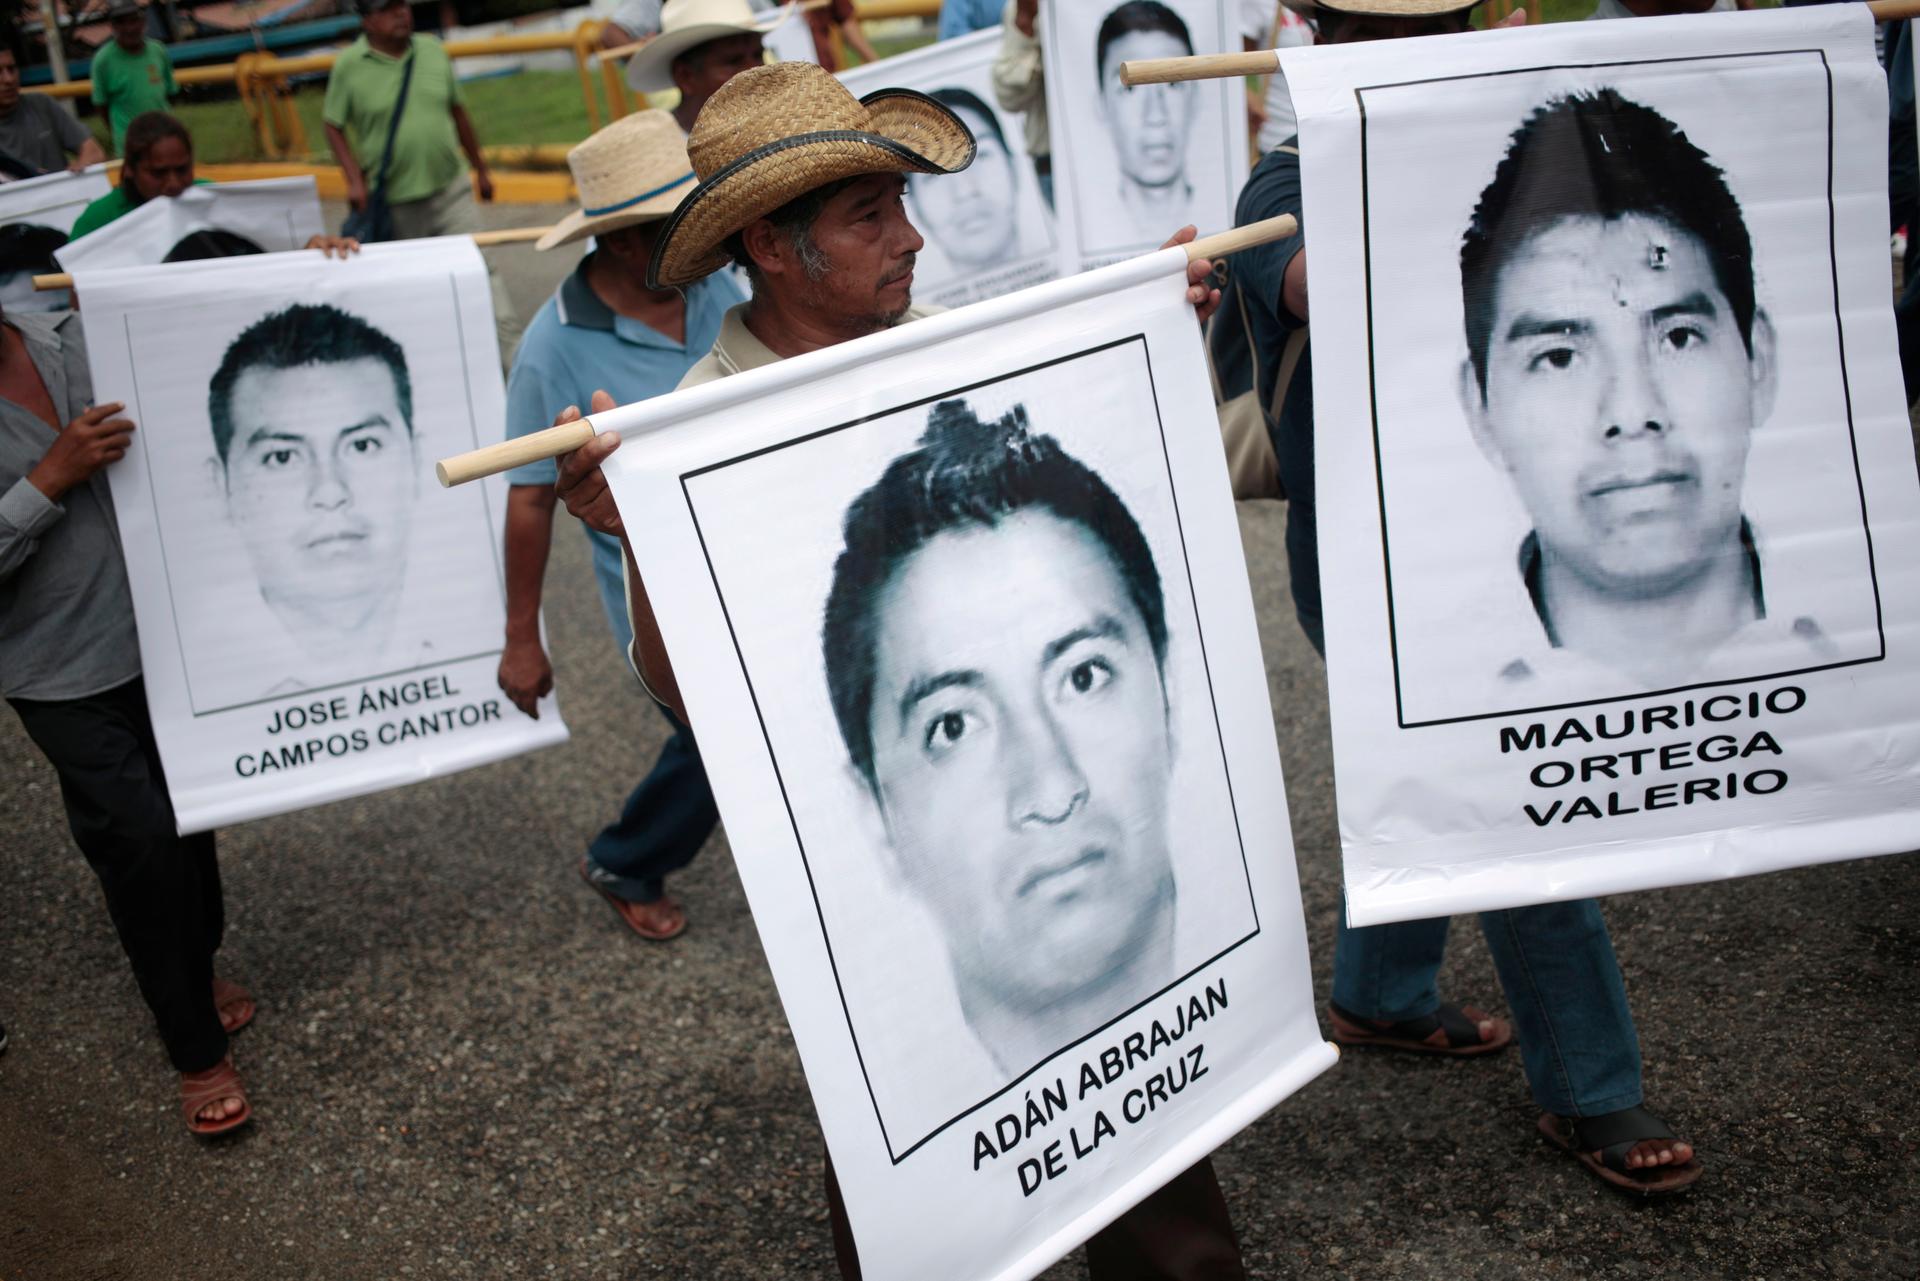 People carry photographs of missing students during a march in Acapulco on October 17, 2014. On September 26, police allegedly linked to a criminal gang shot dead at least three students and abducted dozens of others during clashes in the southwestern cit